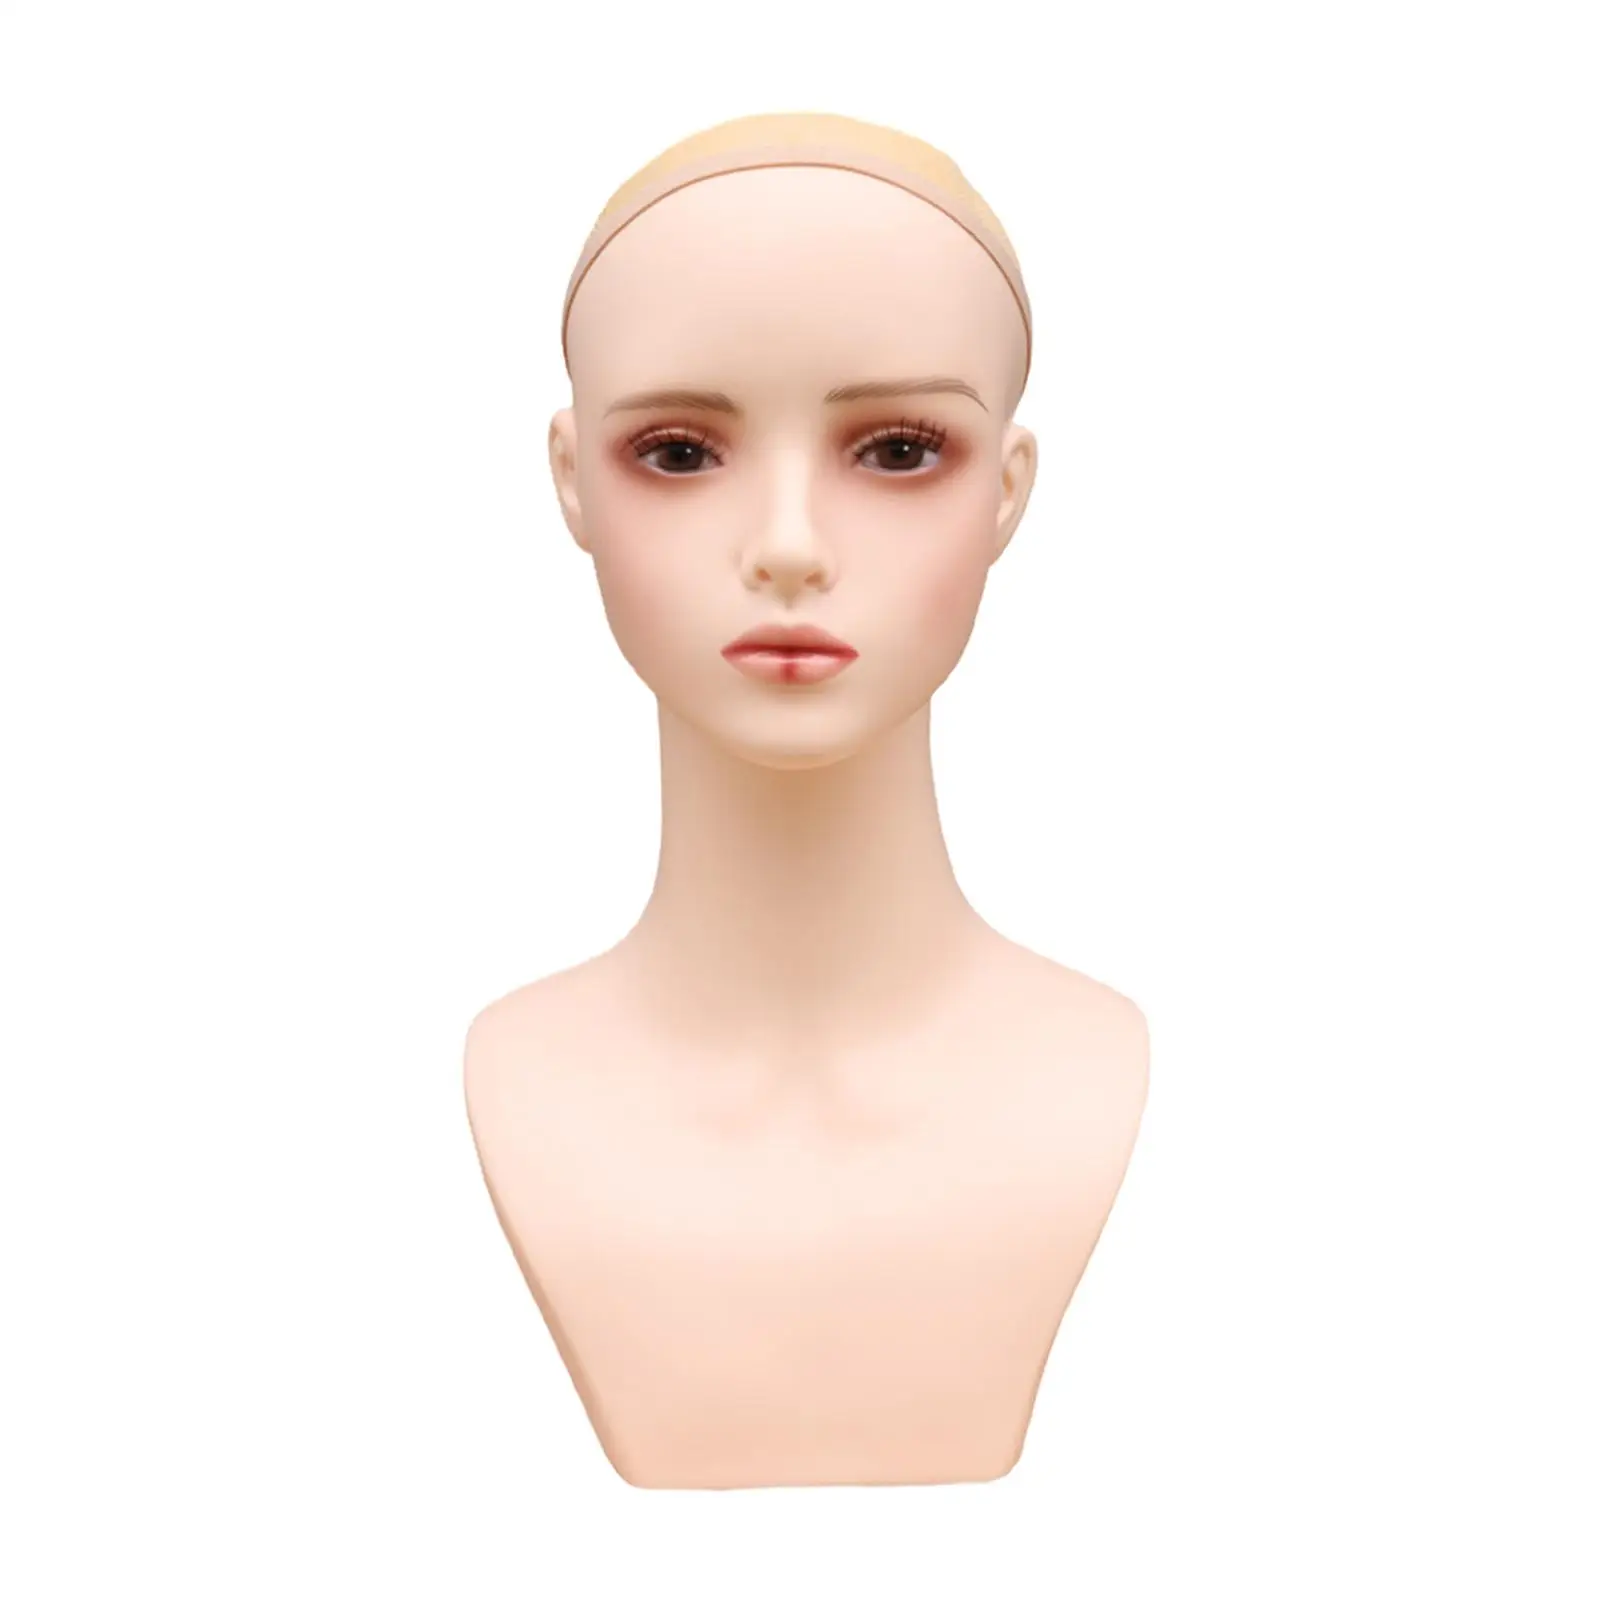 Female Bald Mannequin Head with Shoulder for Wigs Making Jewelry Earrings